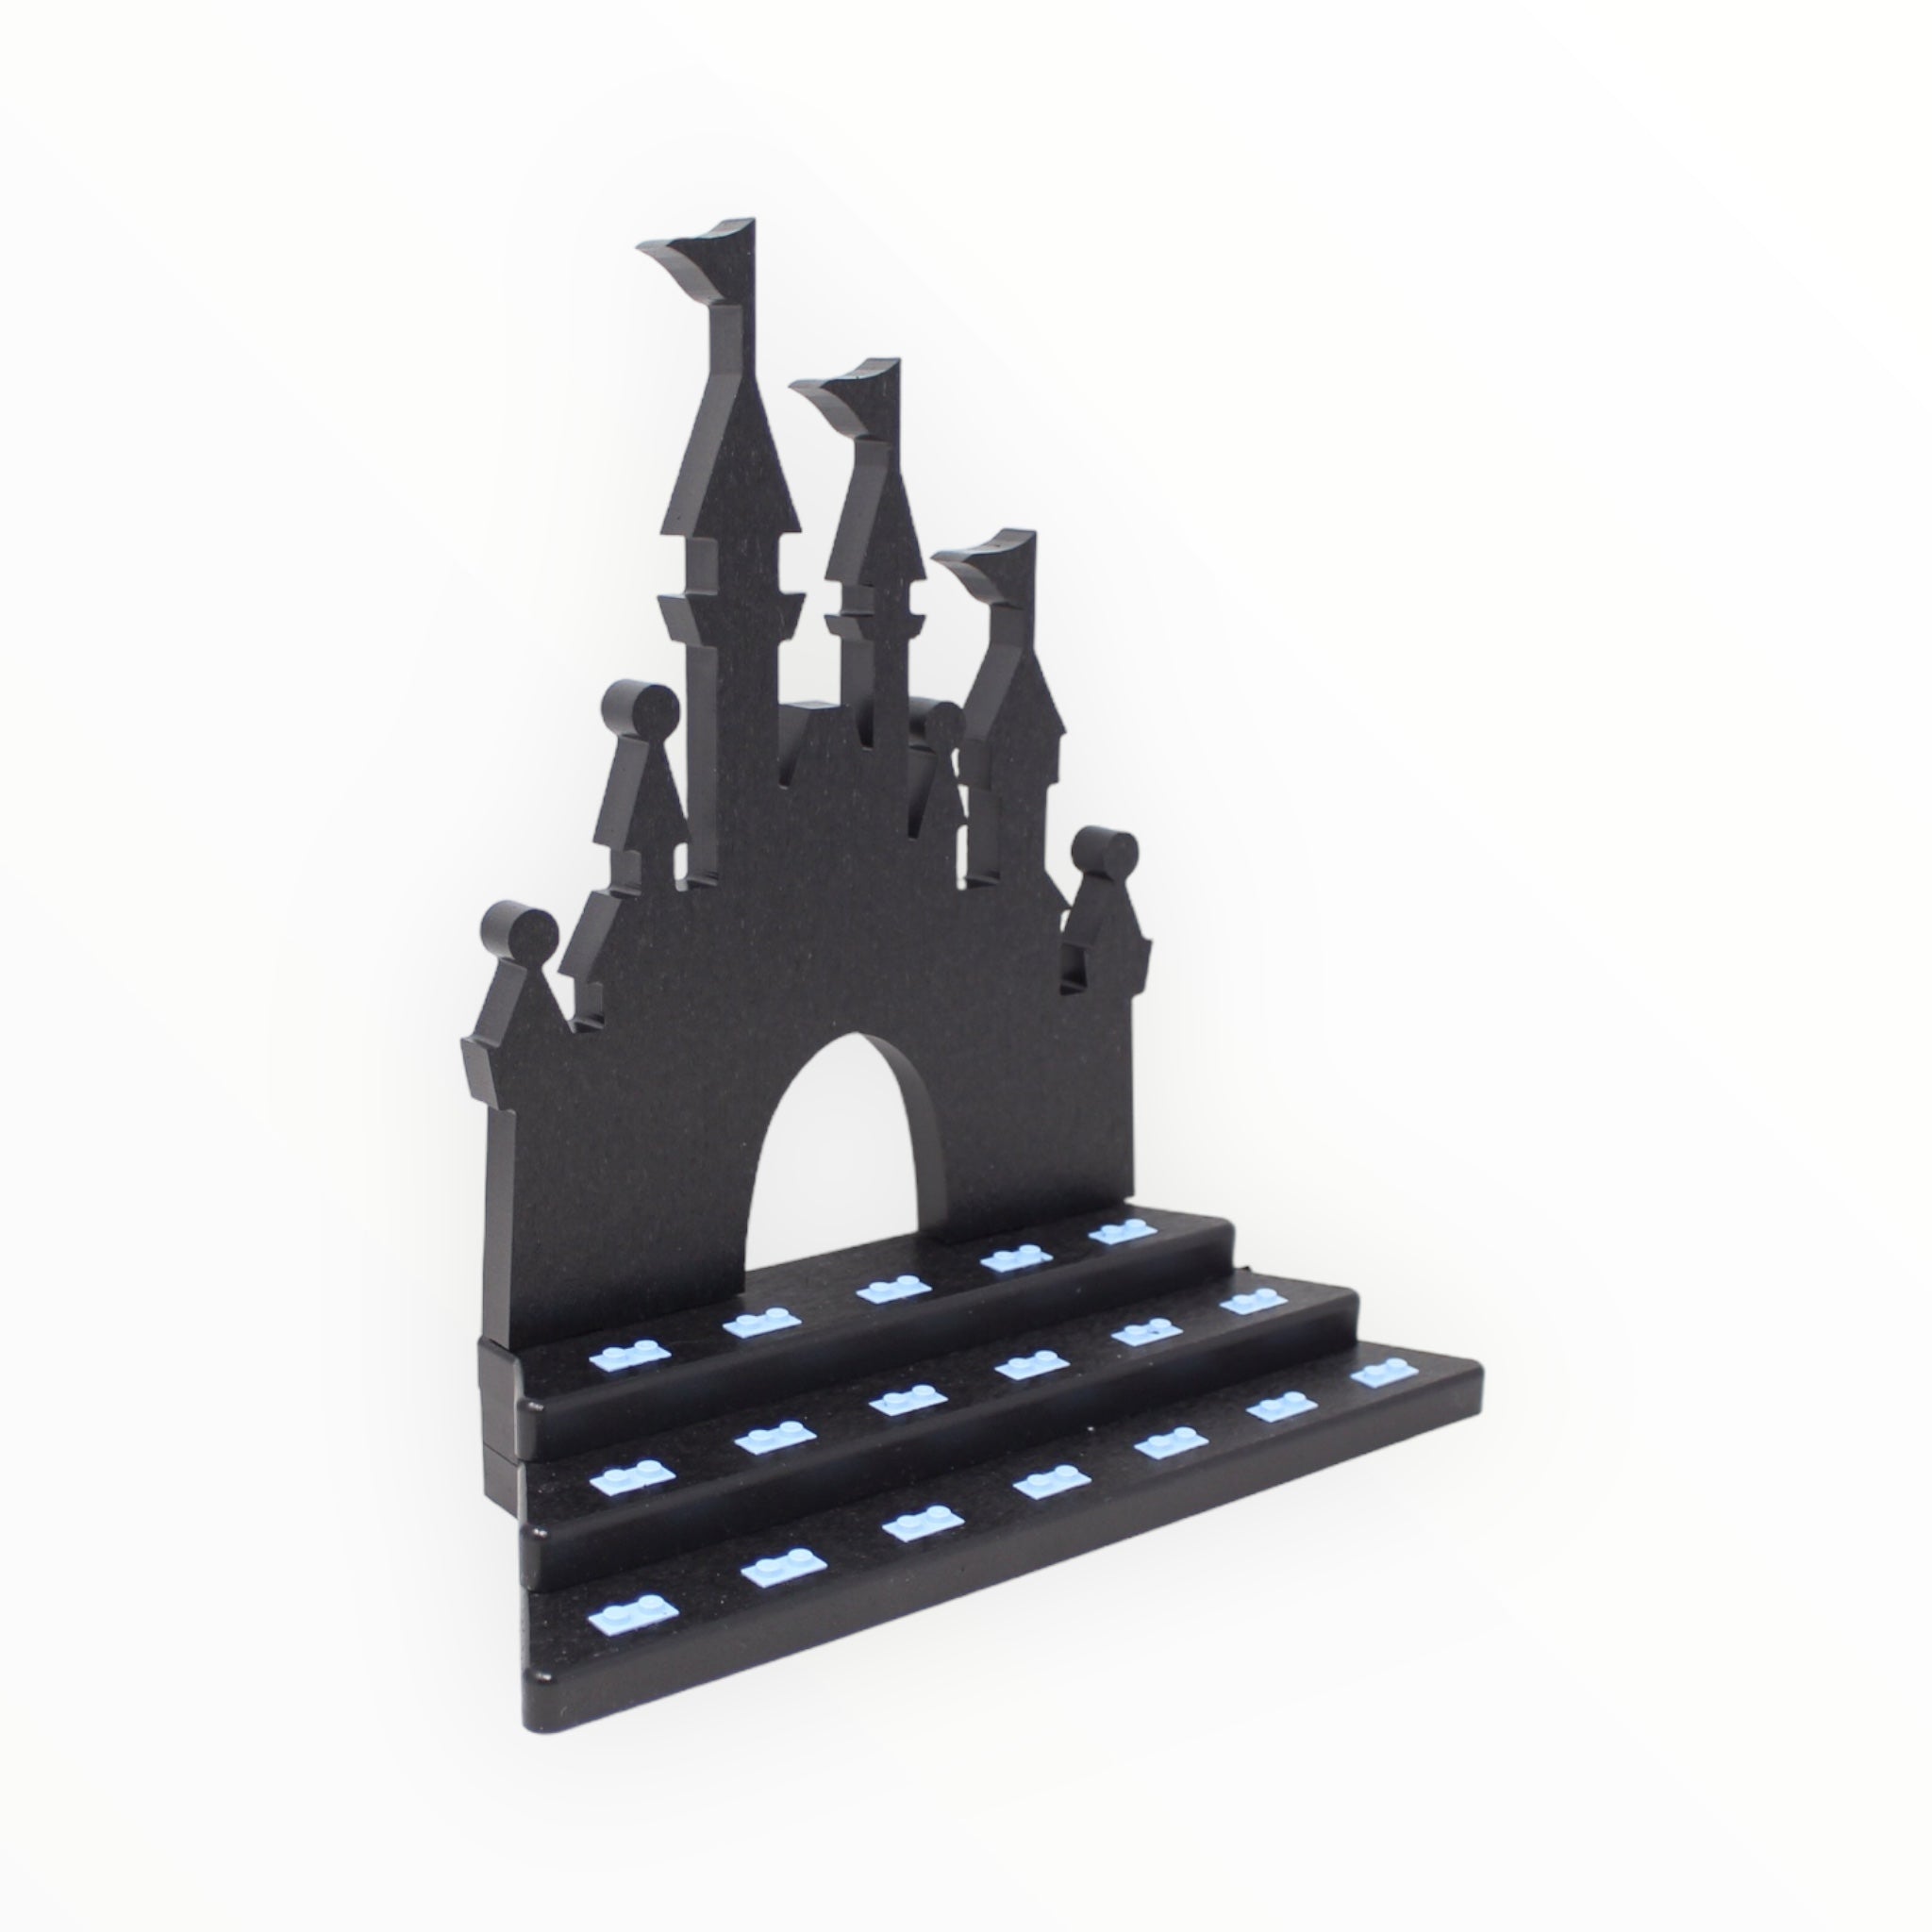 Castle-Themed Minifigure Display Stand (black with blue studs)